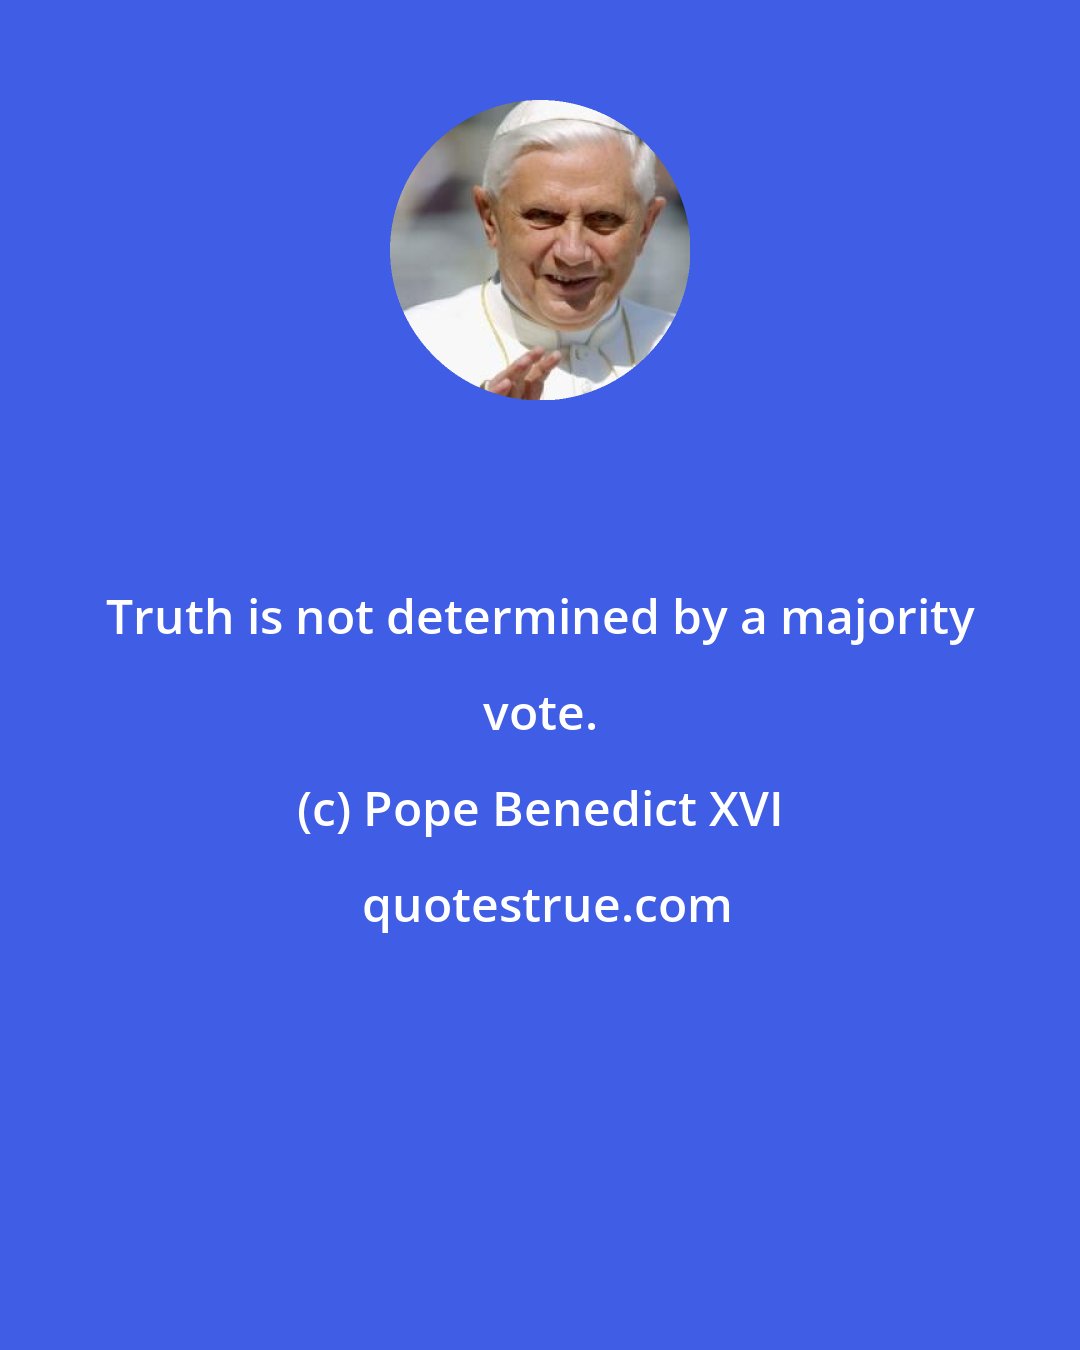 Pope Benedict XVI: Truth is not determined by a majority vote.